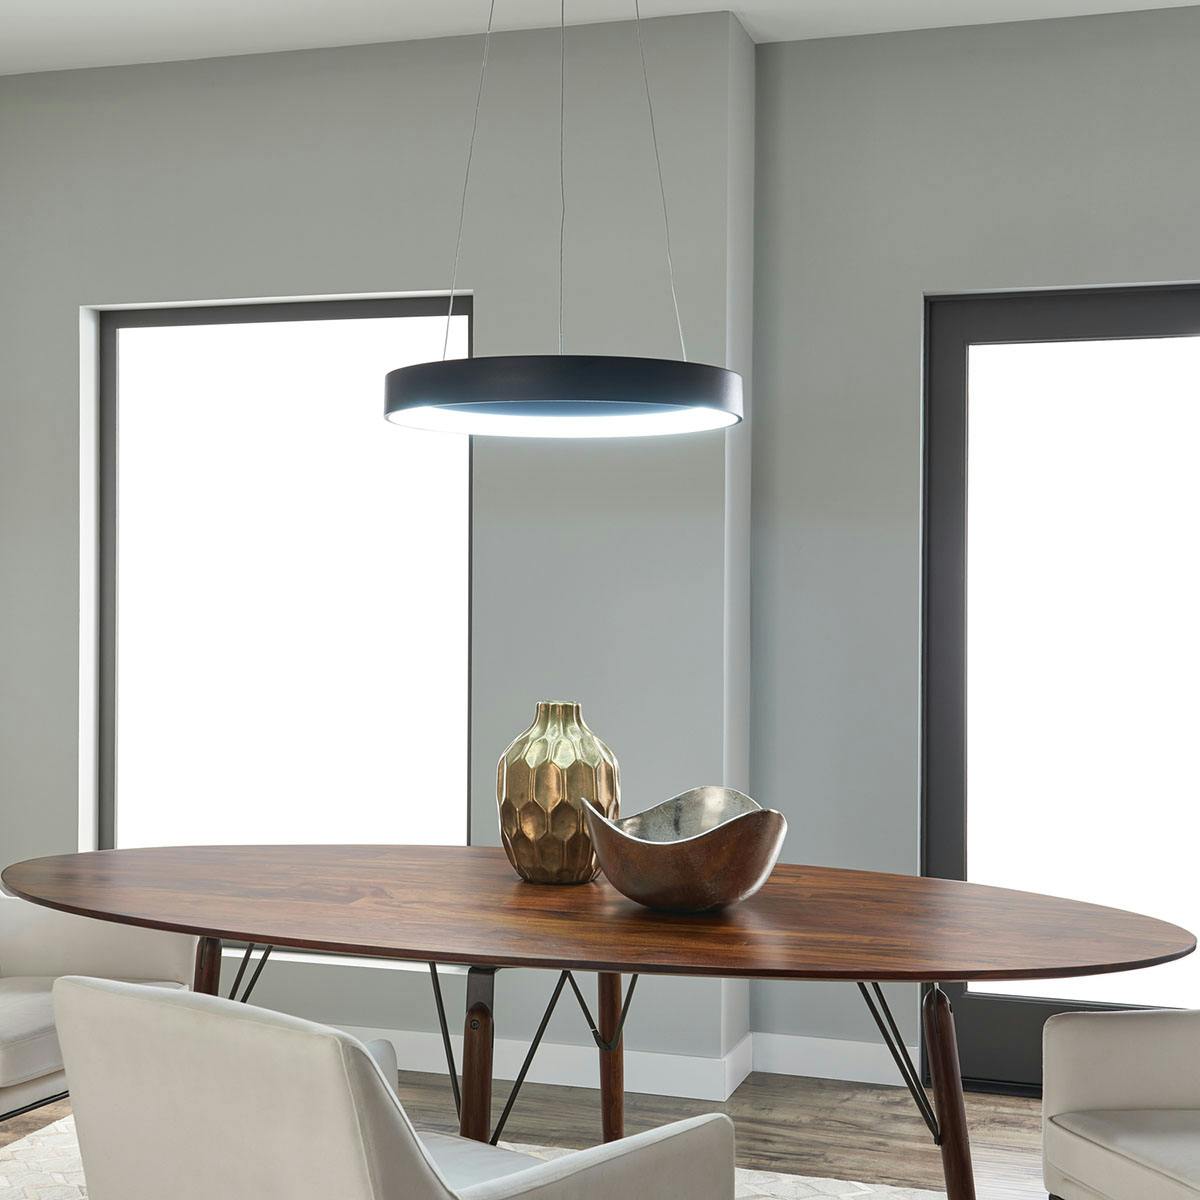 Day time dining room image featuring Fornello pendant 83455